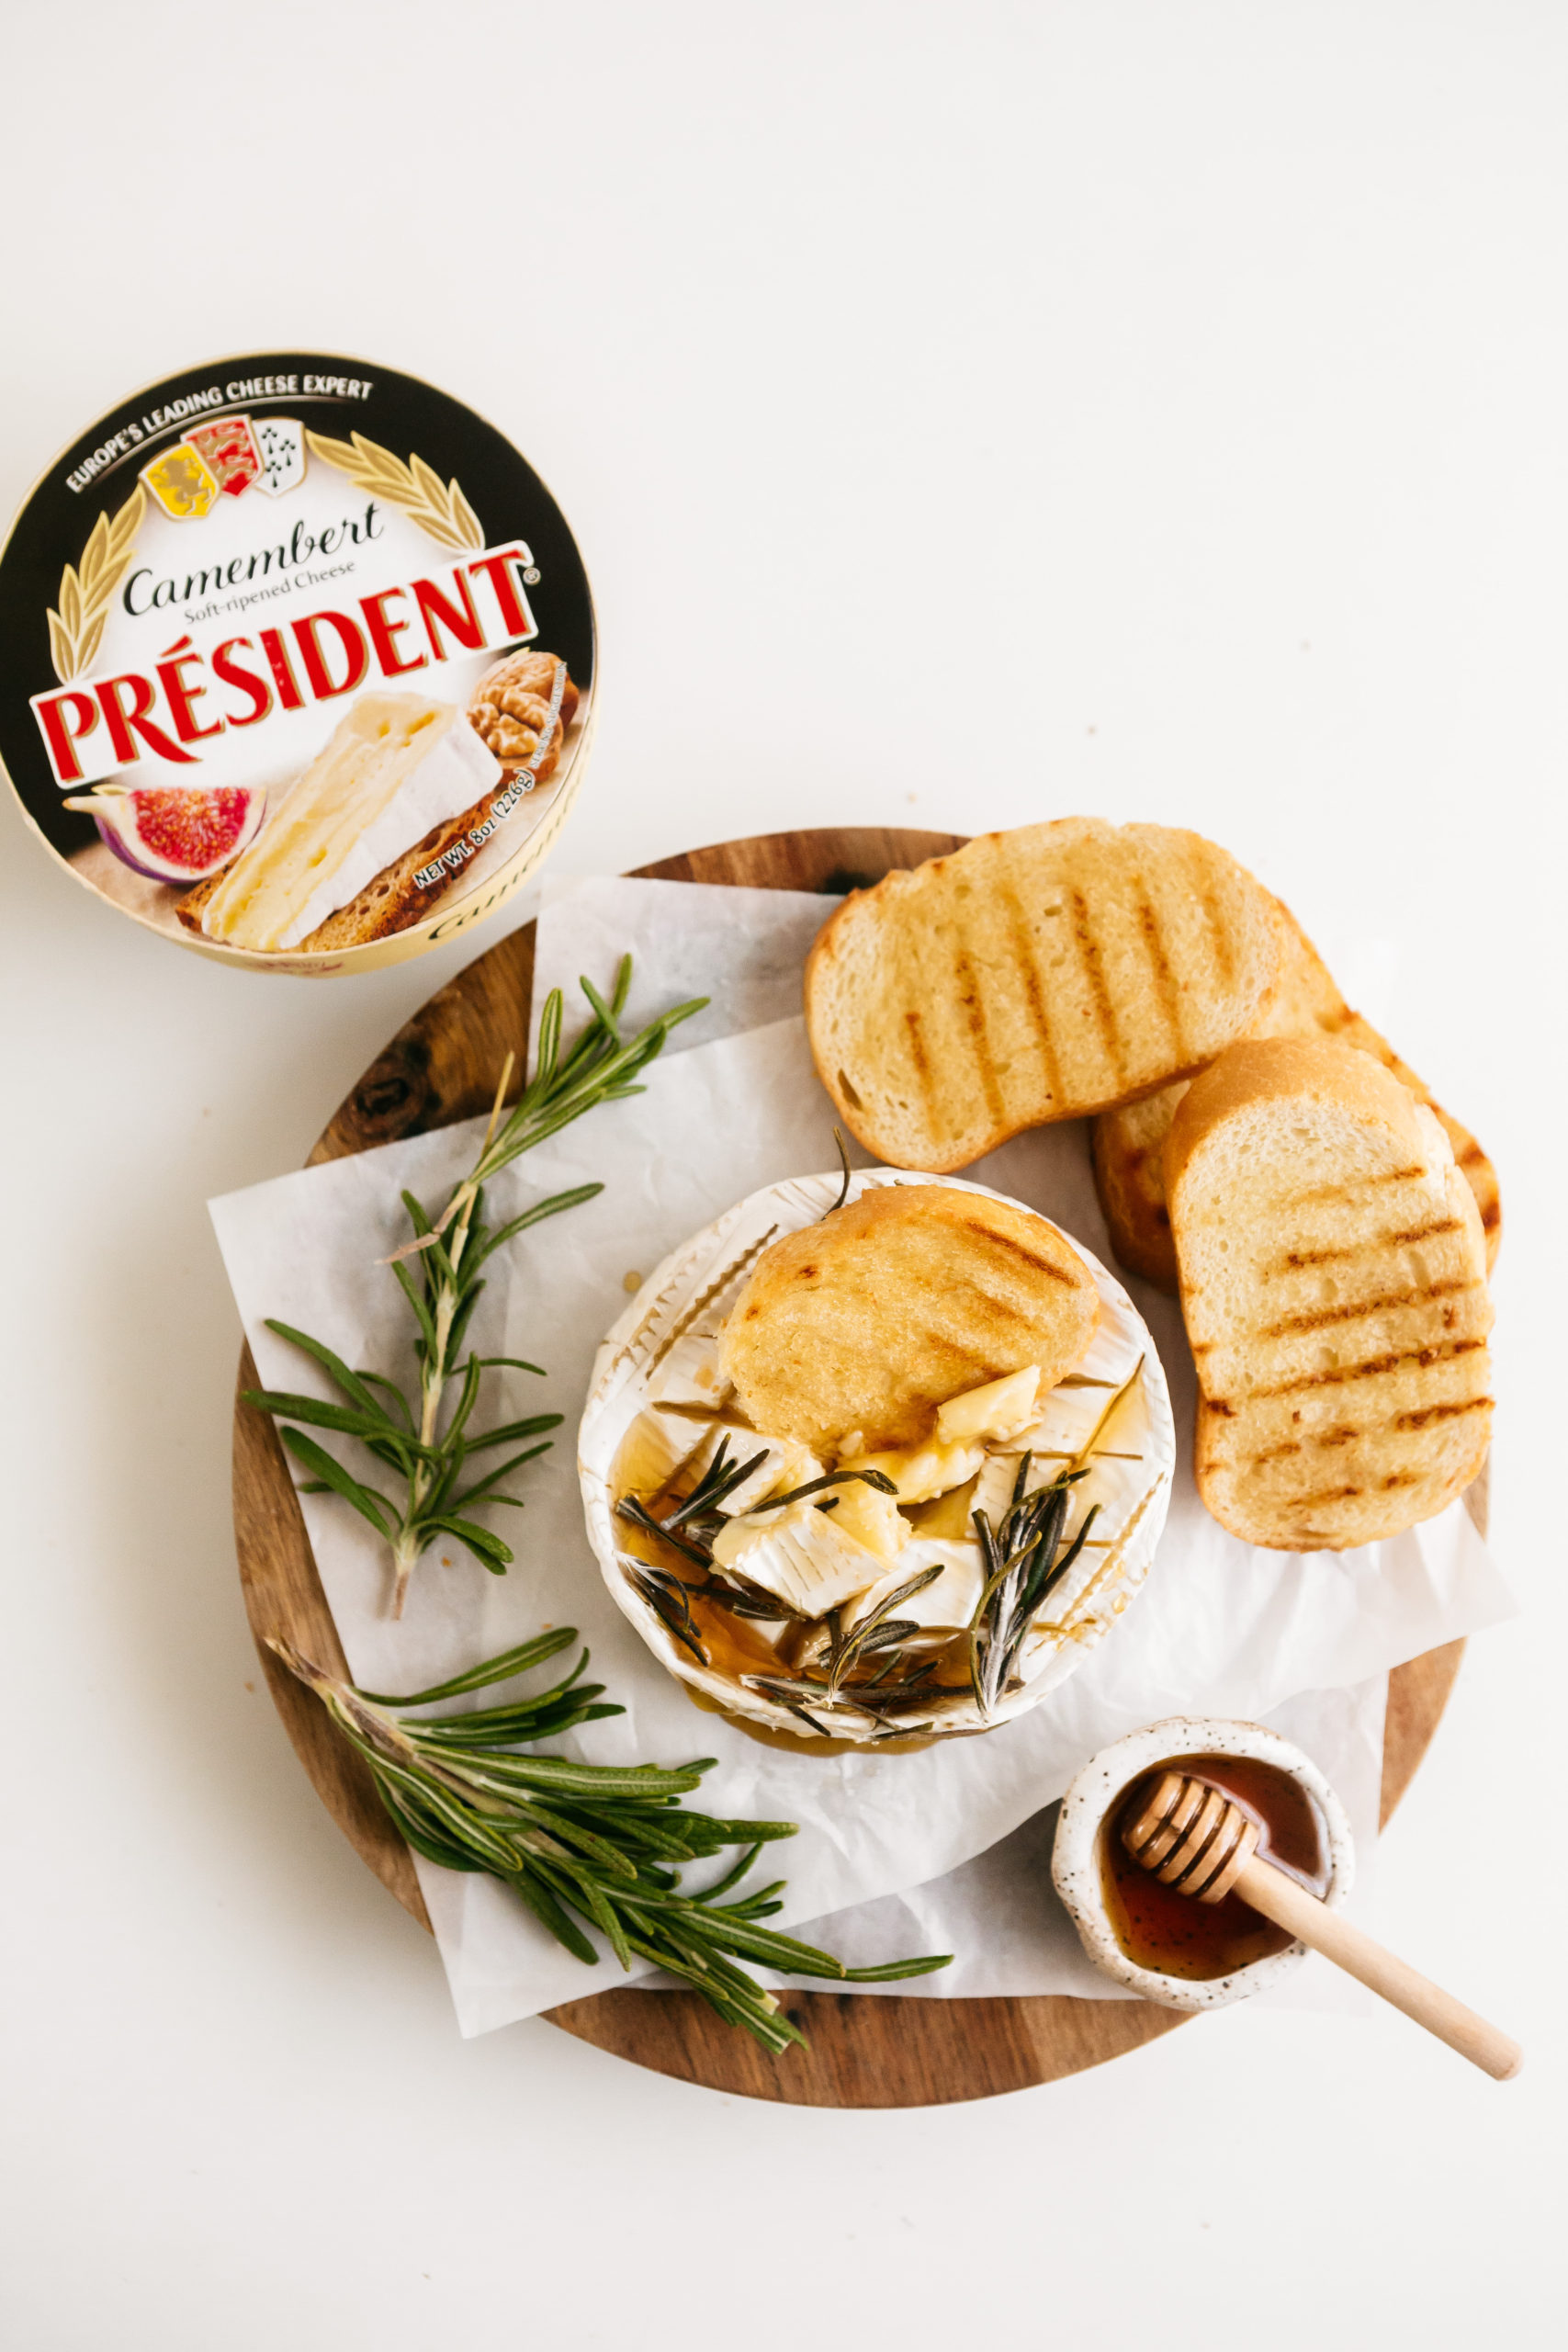 Baked Camembert with Hot Honey